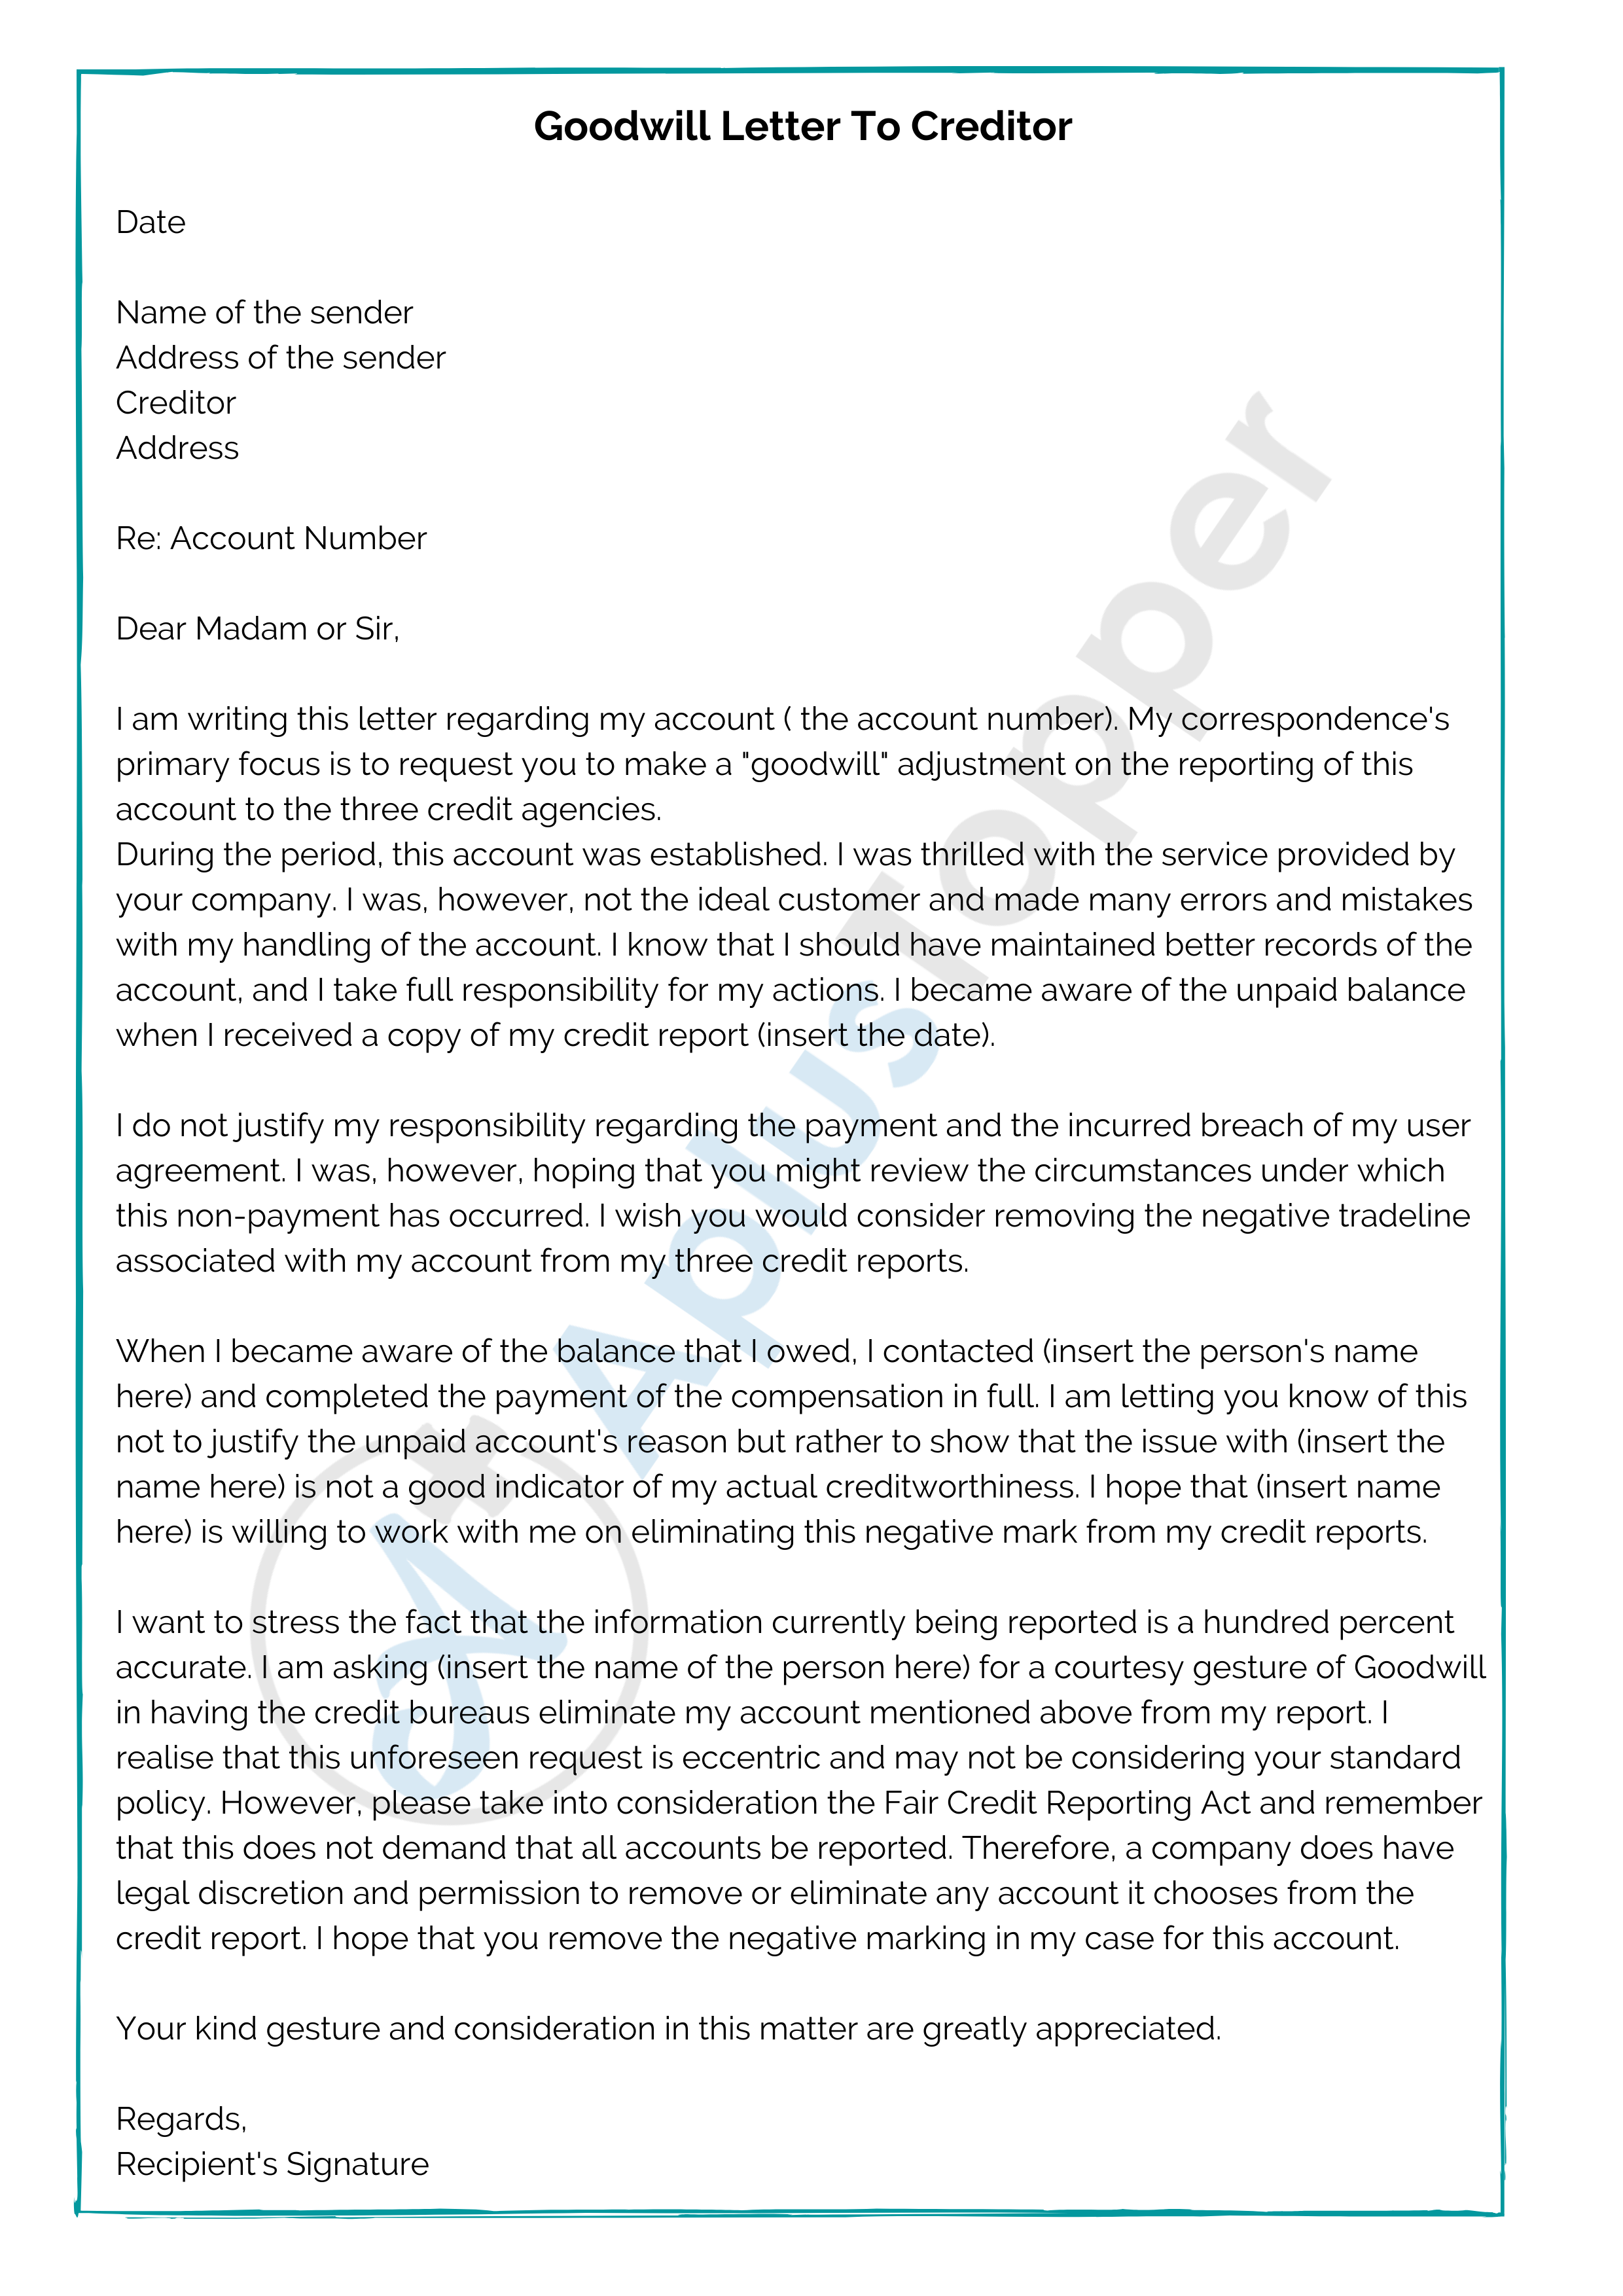 Sample Goodwill Letters  Format, Examples and How To Write? - A